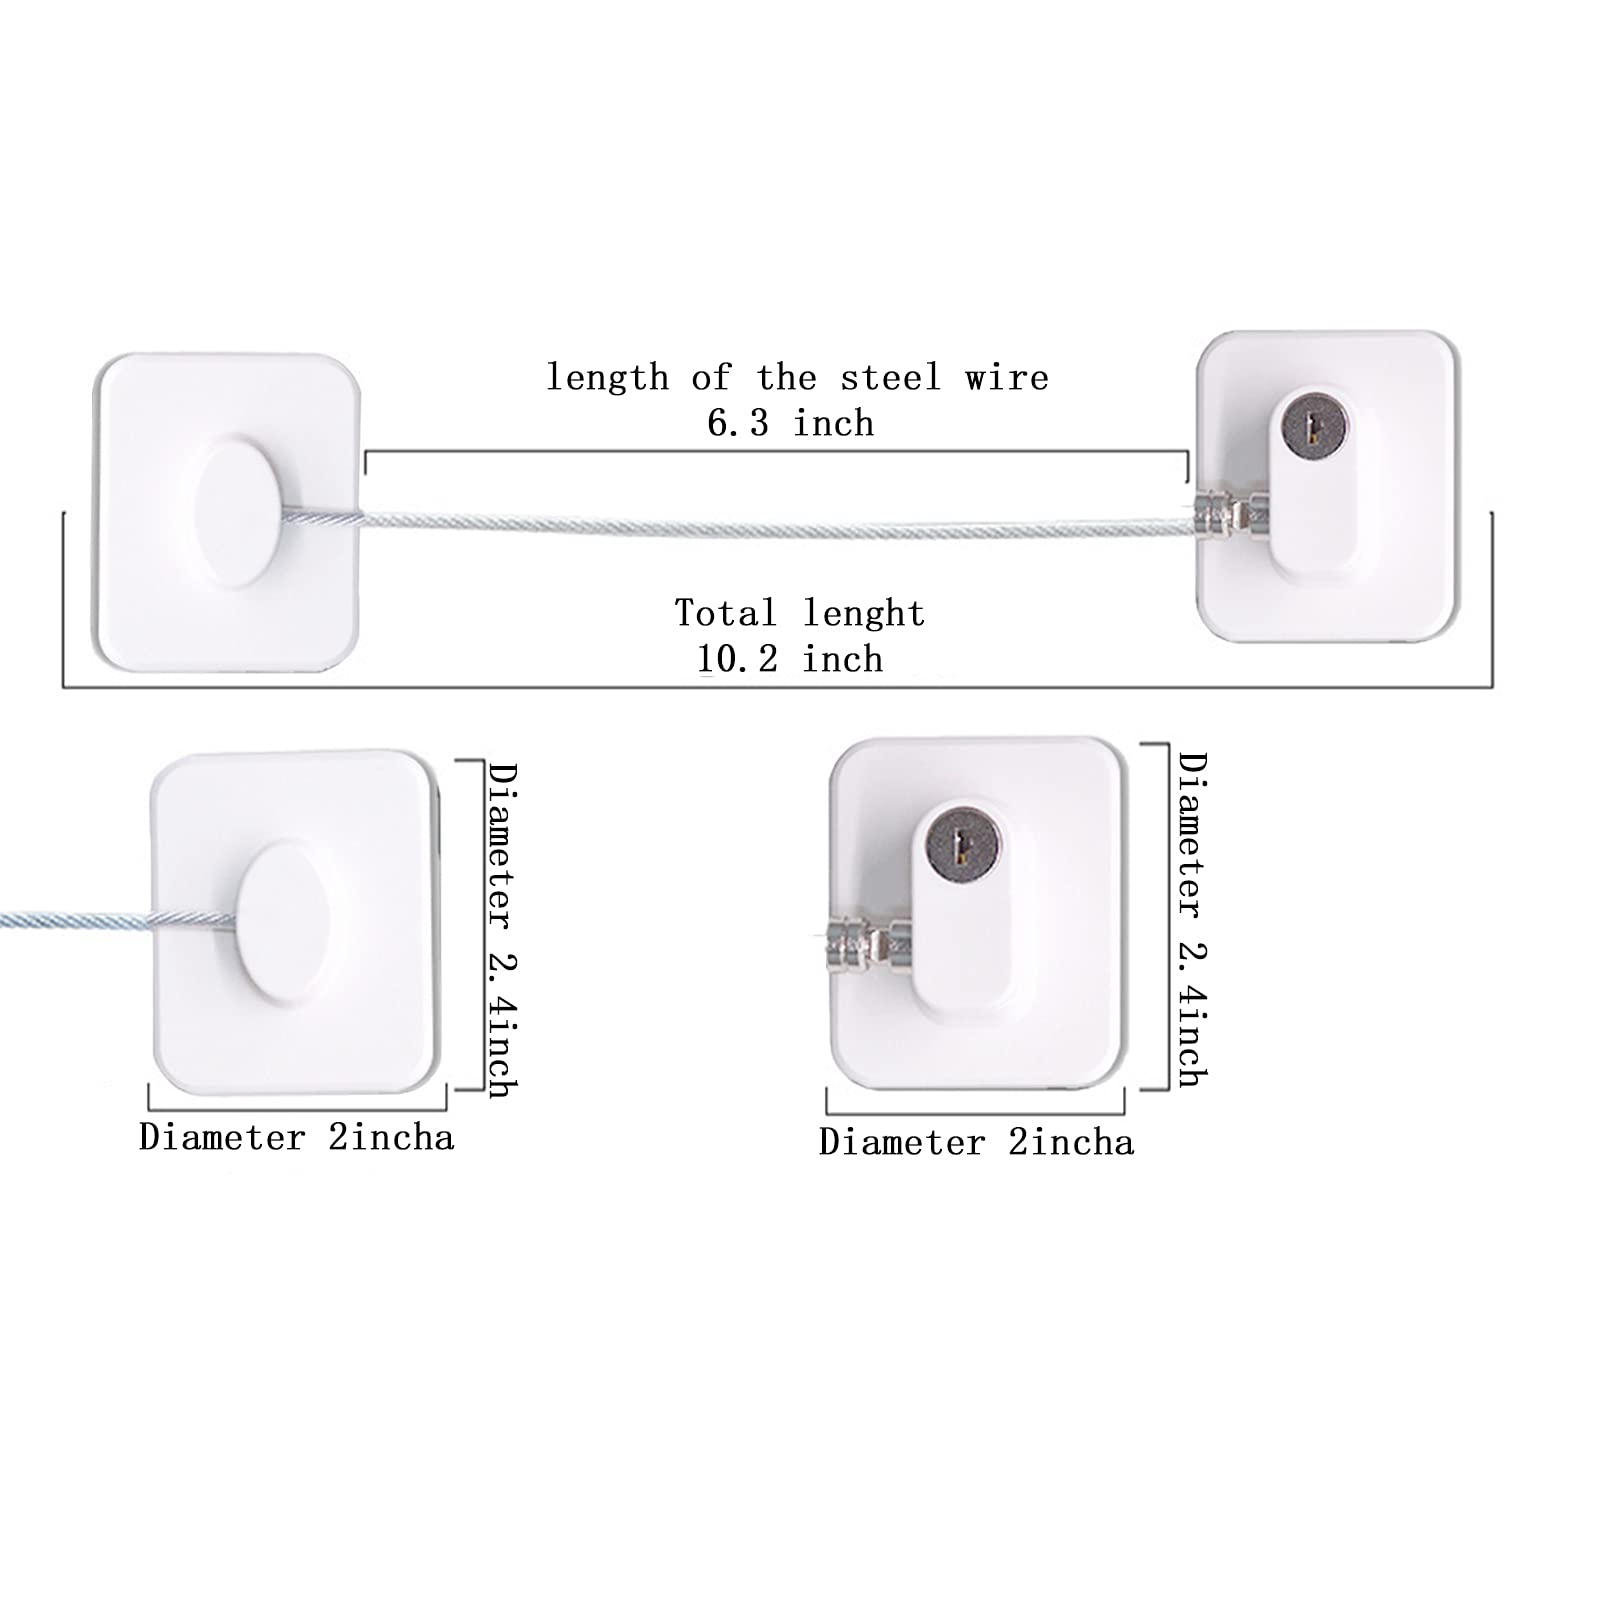 KIZZHISI Child Safety Locks (4 Pack),Refrigerator Lock with Keys,for Fridge, Cabinets, Drawers, Dishwasher, Toilet and Child Safety Cabinet Lock, 3M Adhesive No Drilling (White 4pcs)